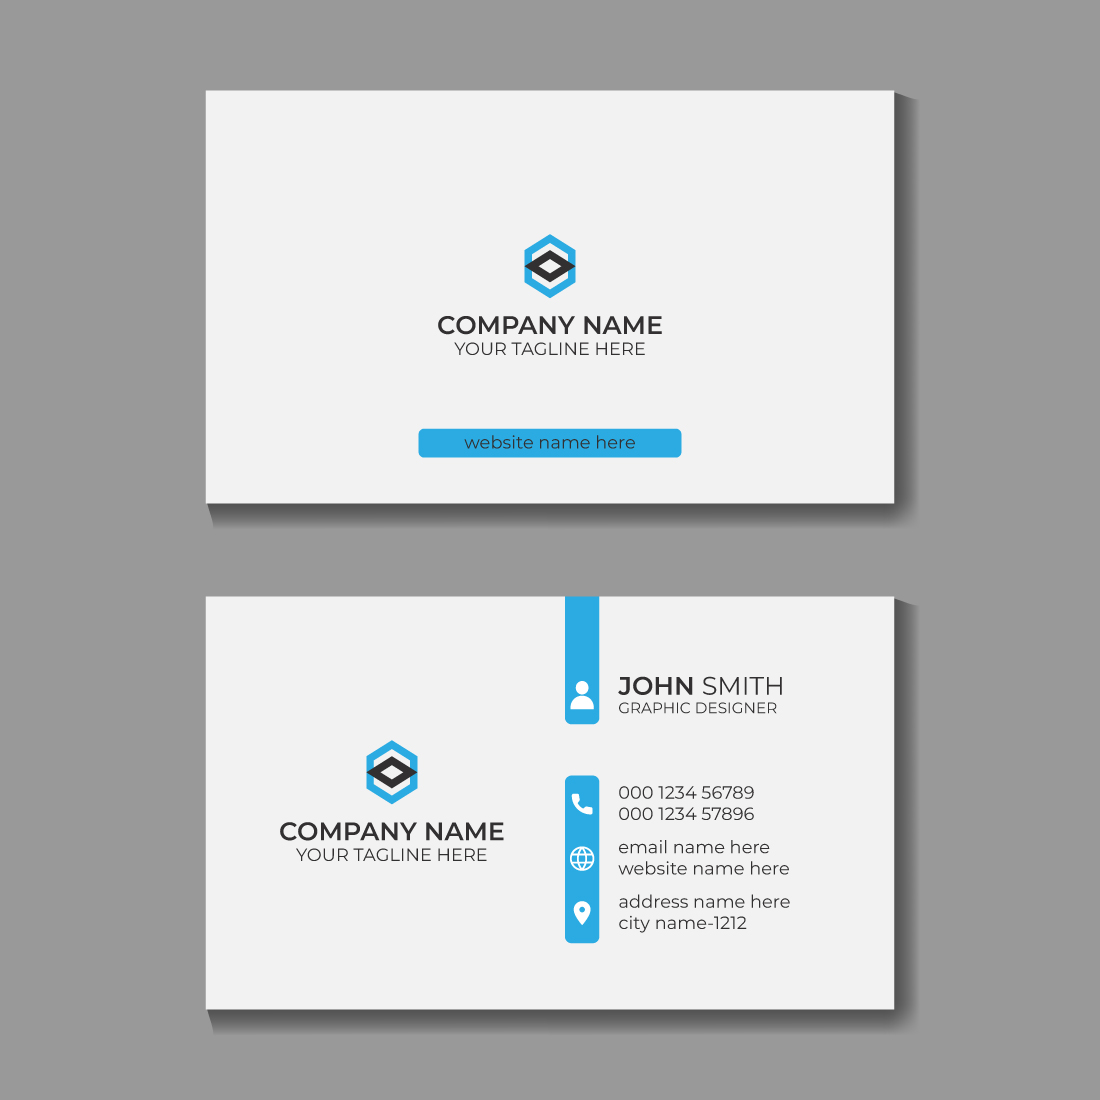 4 Stylish and Professional Business Card Design Templates